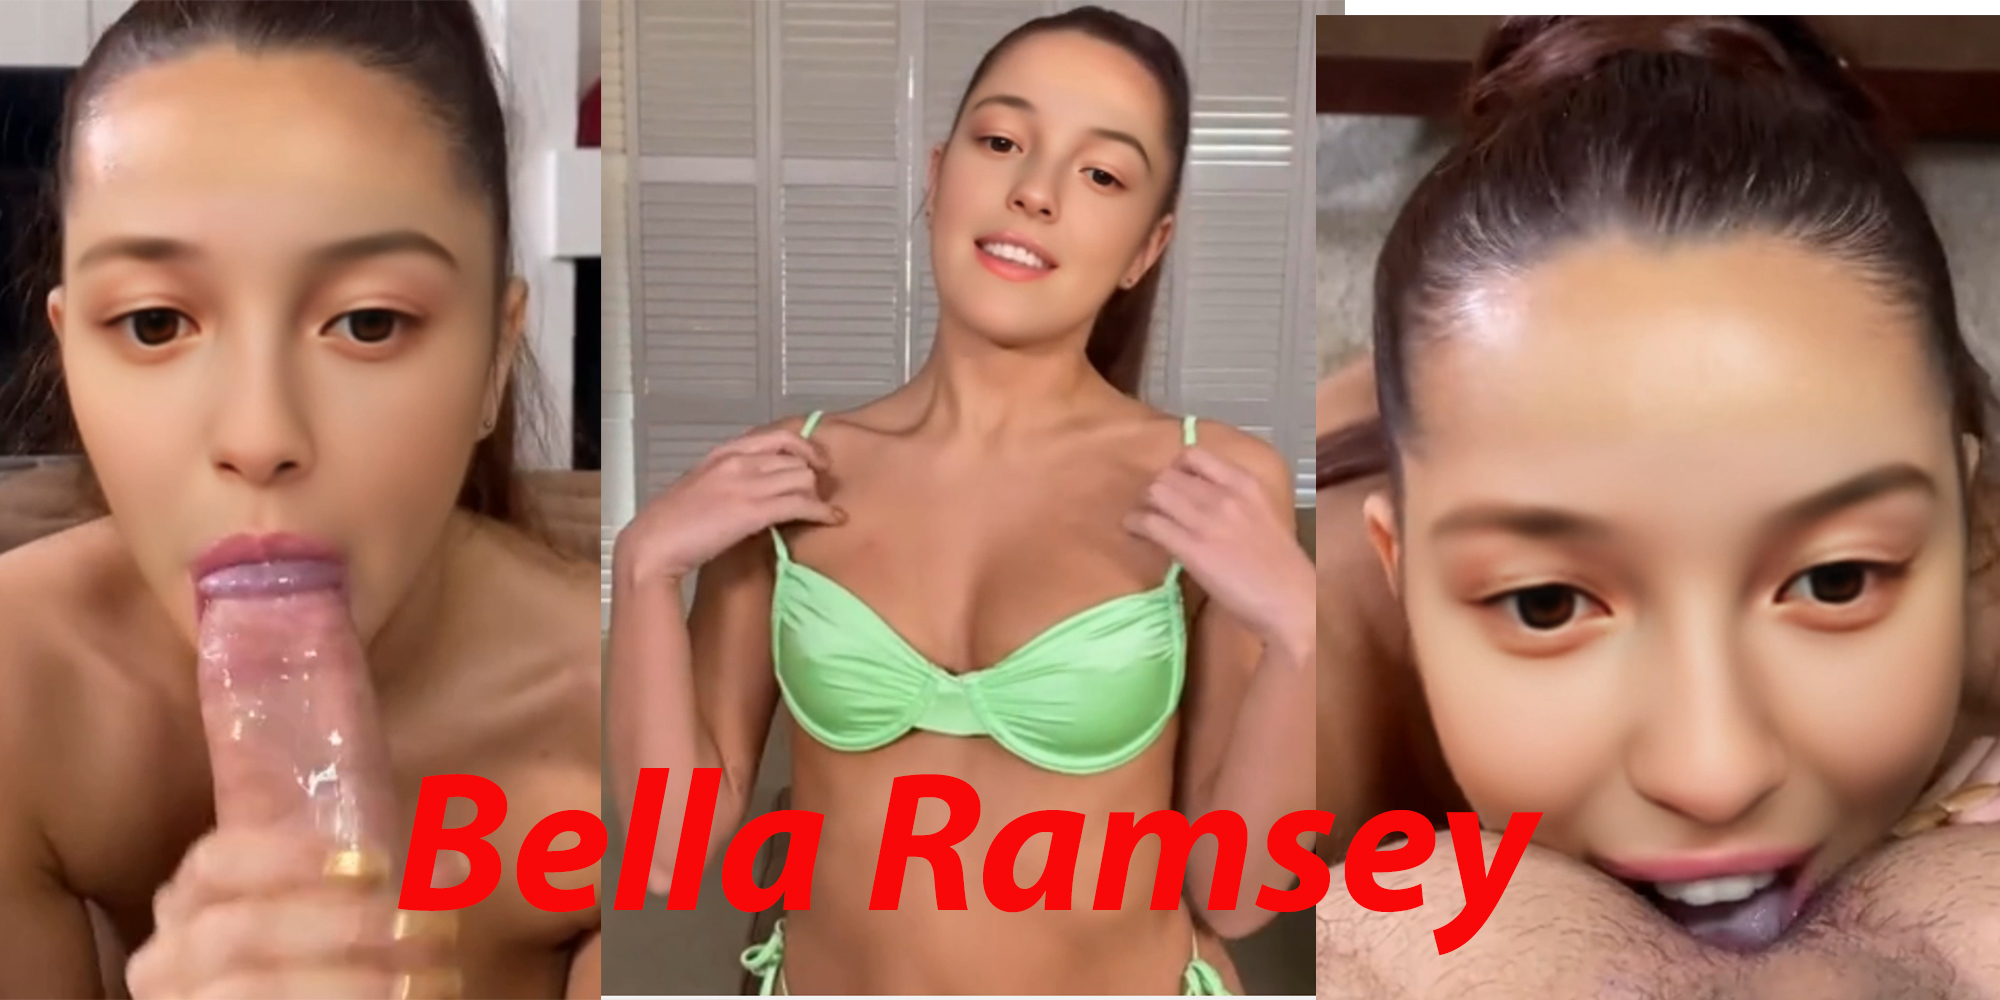 Bella Ramsey meets new people by making rimjob and blowjobs